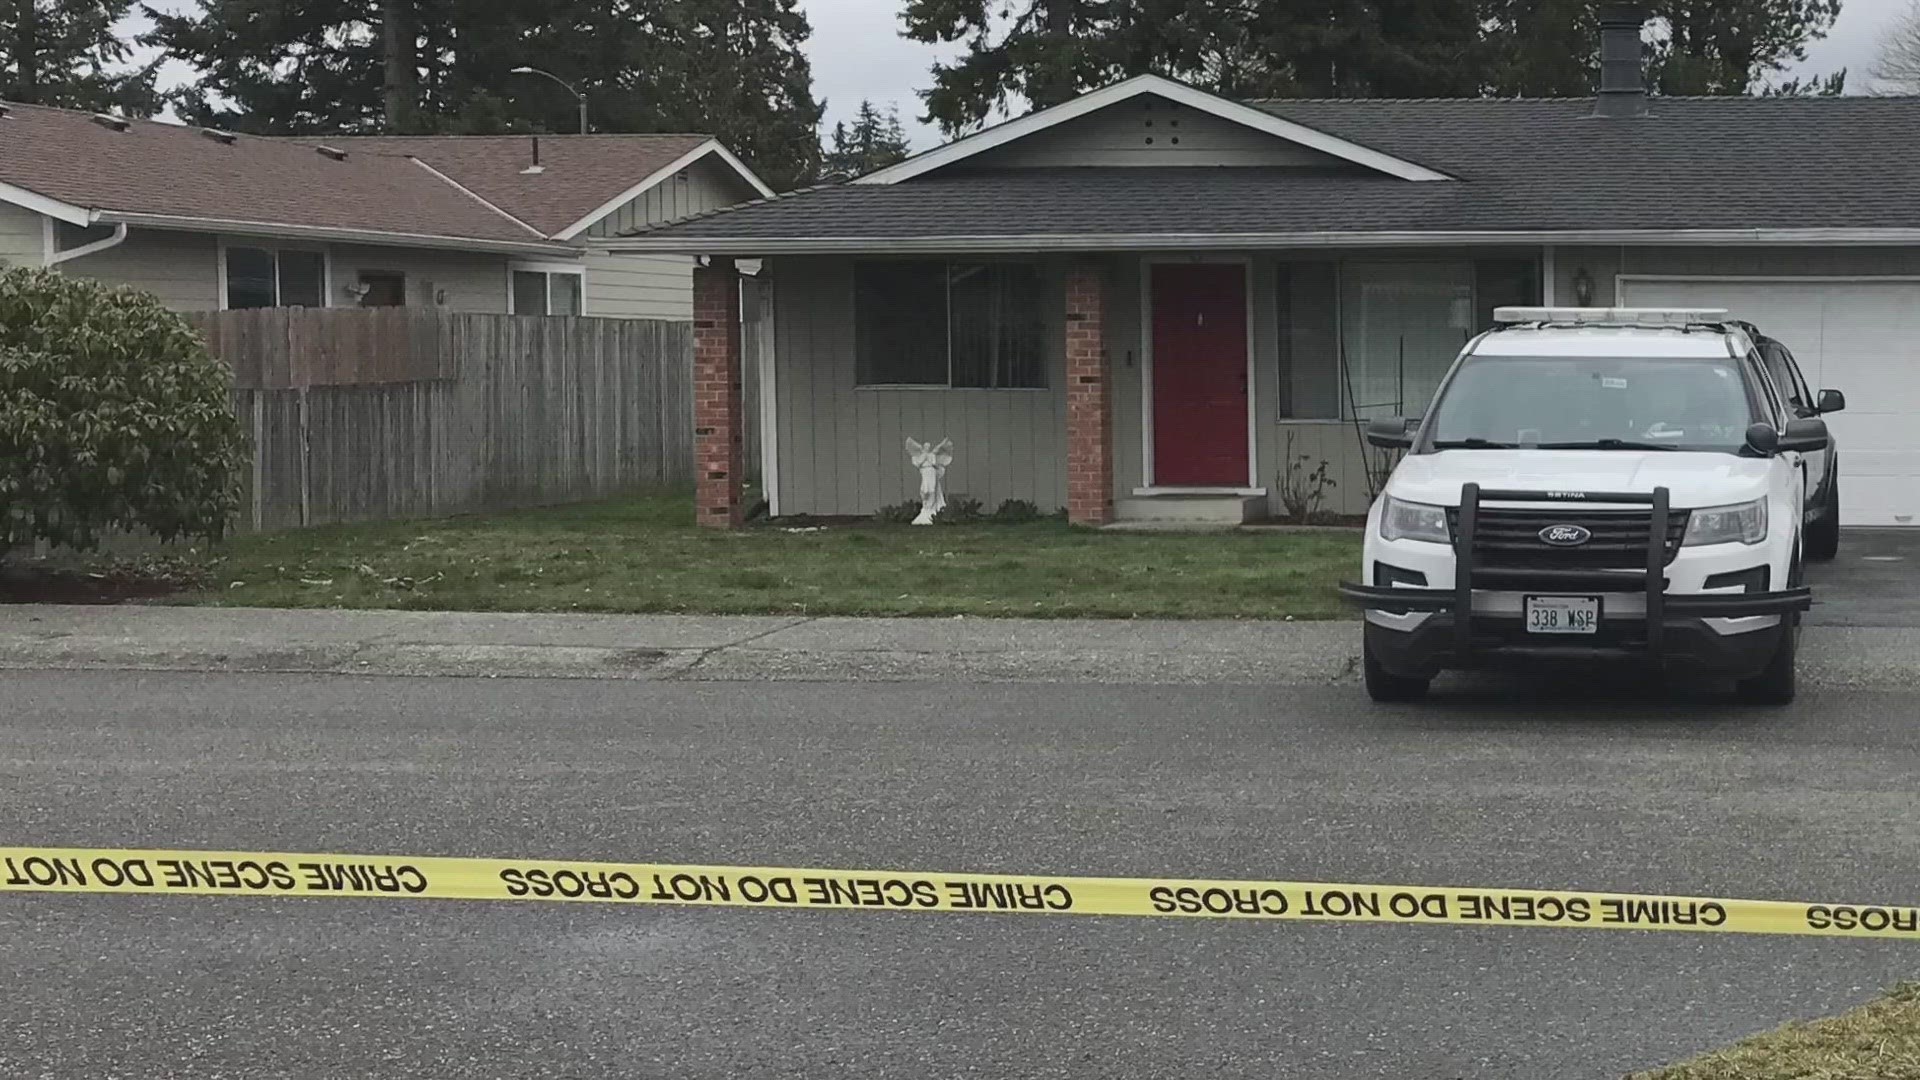 The shooting took place near the 800 block of 91st Place Southwest, according to Everett police.